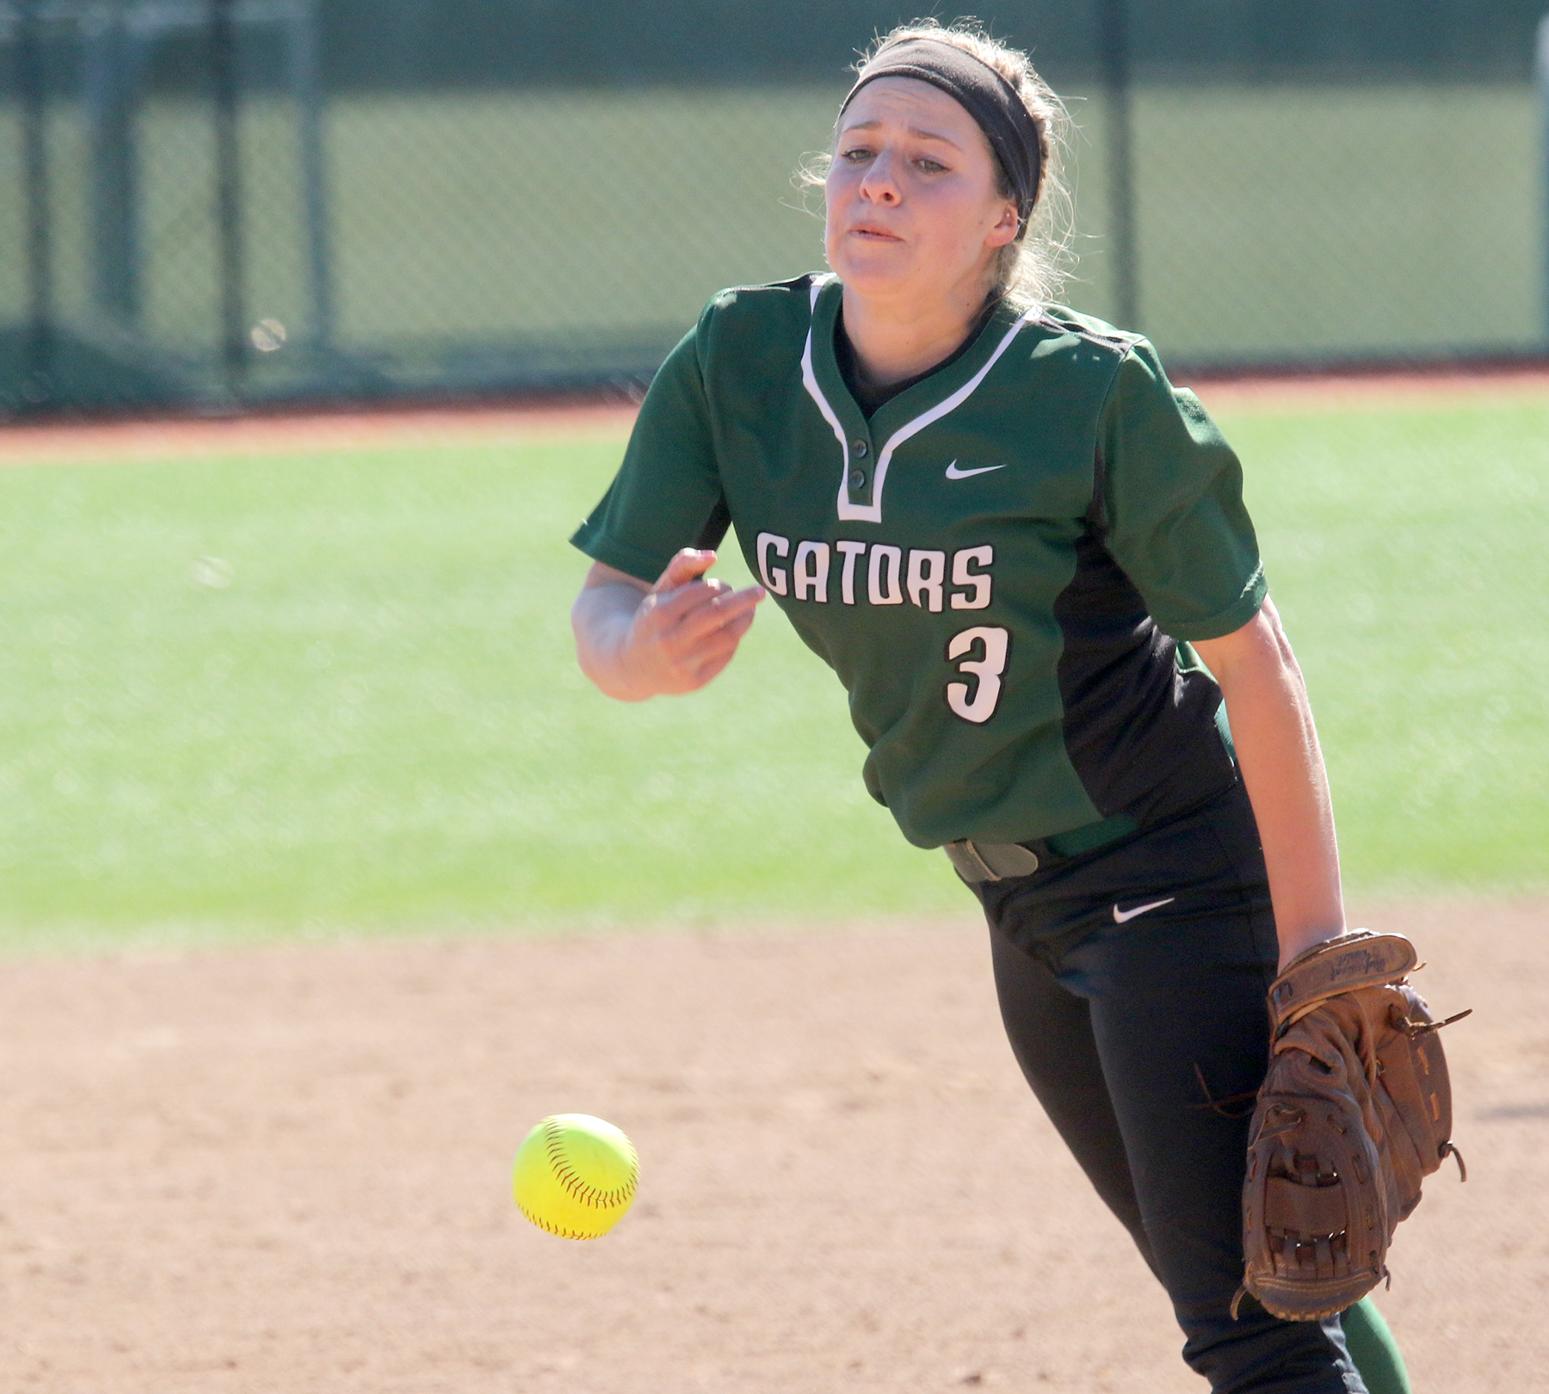 Gators Sweep Purchase in Skyline Doubleheader